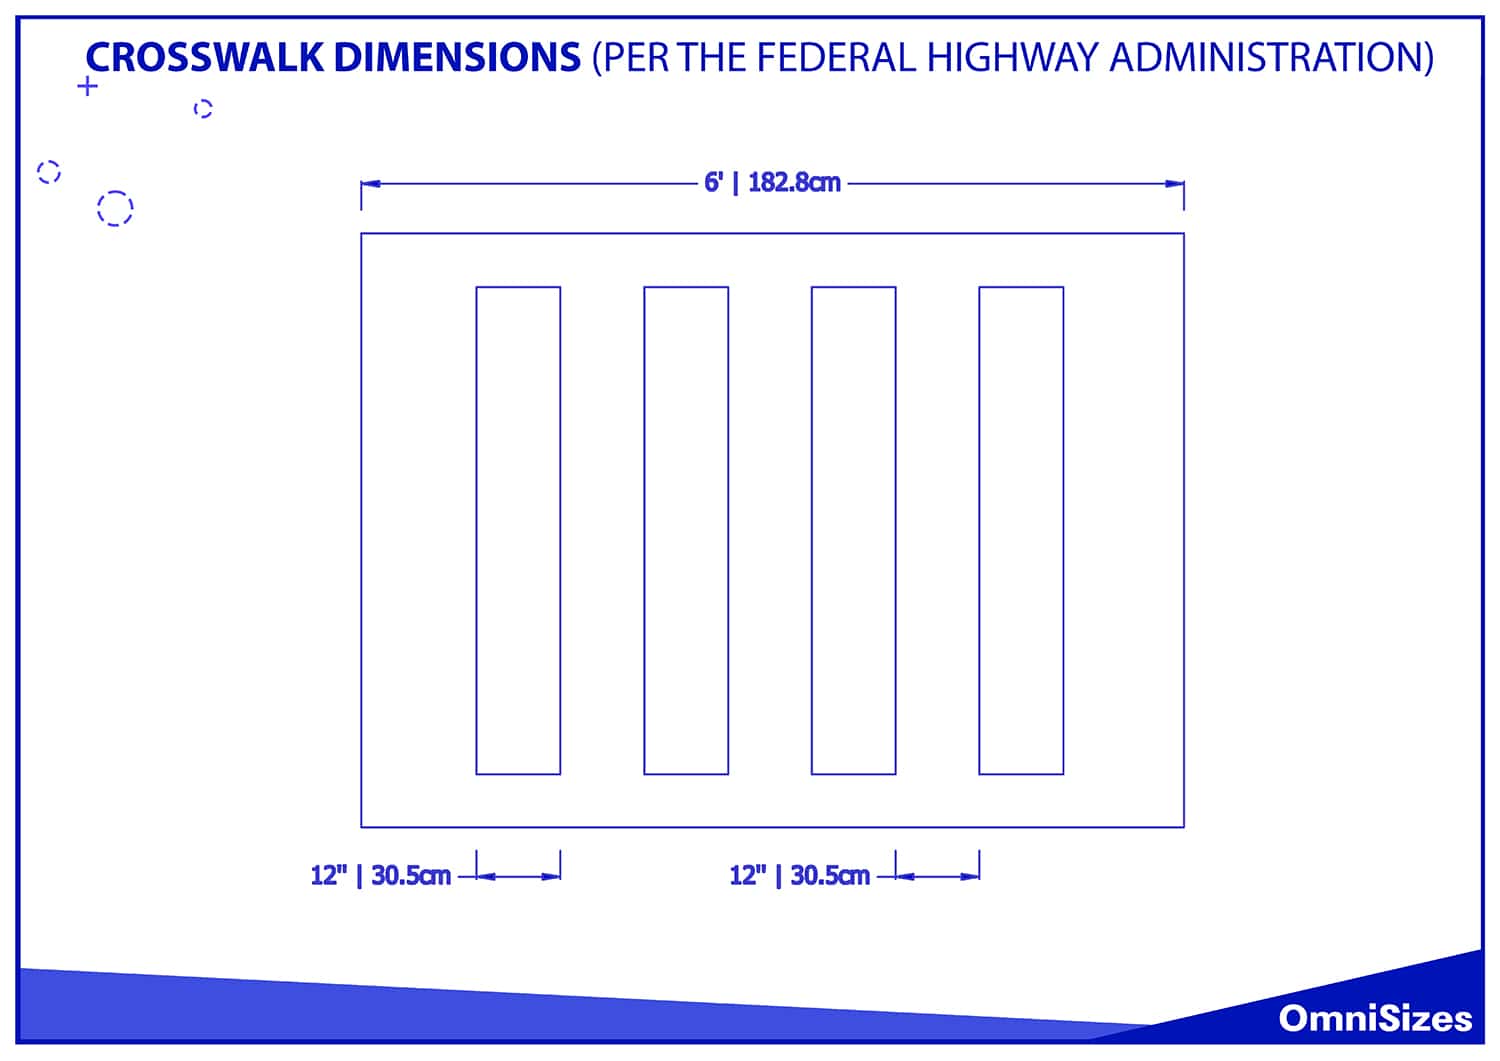 Crosswalk dimensions (per the federal highway administartion)